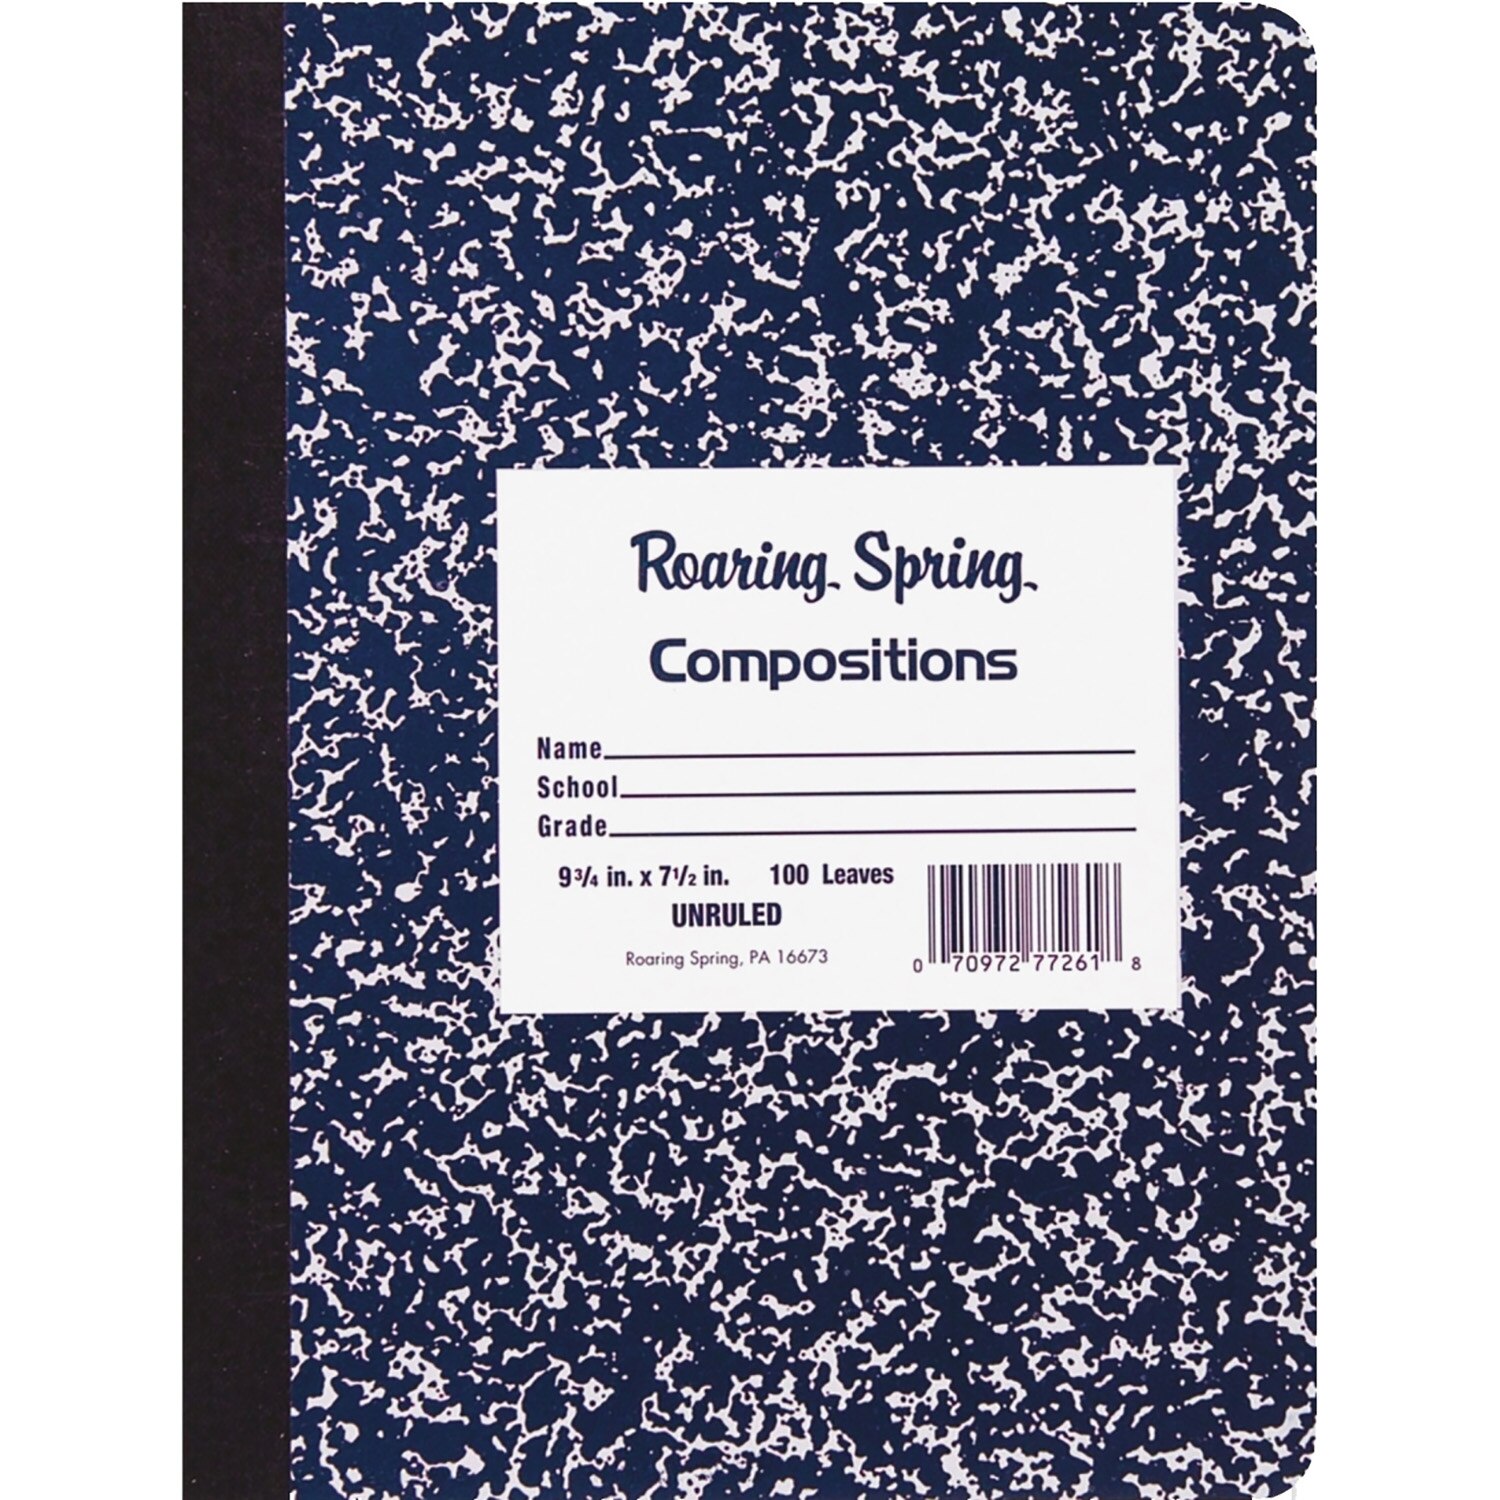 Roaring Spring Hard Cover Composition Book 9.75x7.5 5X5 Graph Ruled 100 Sheets